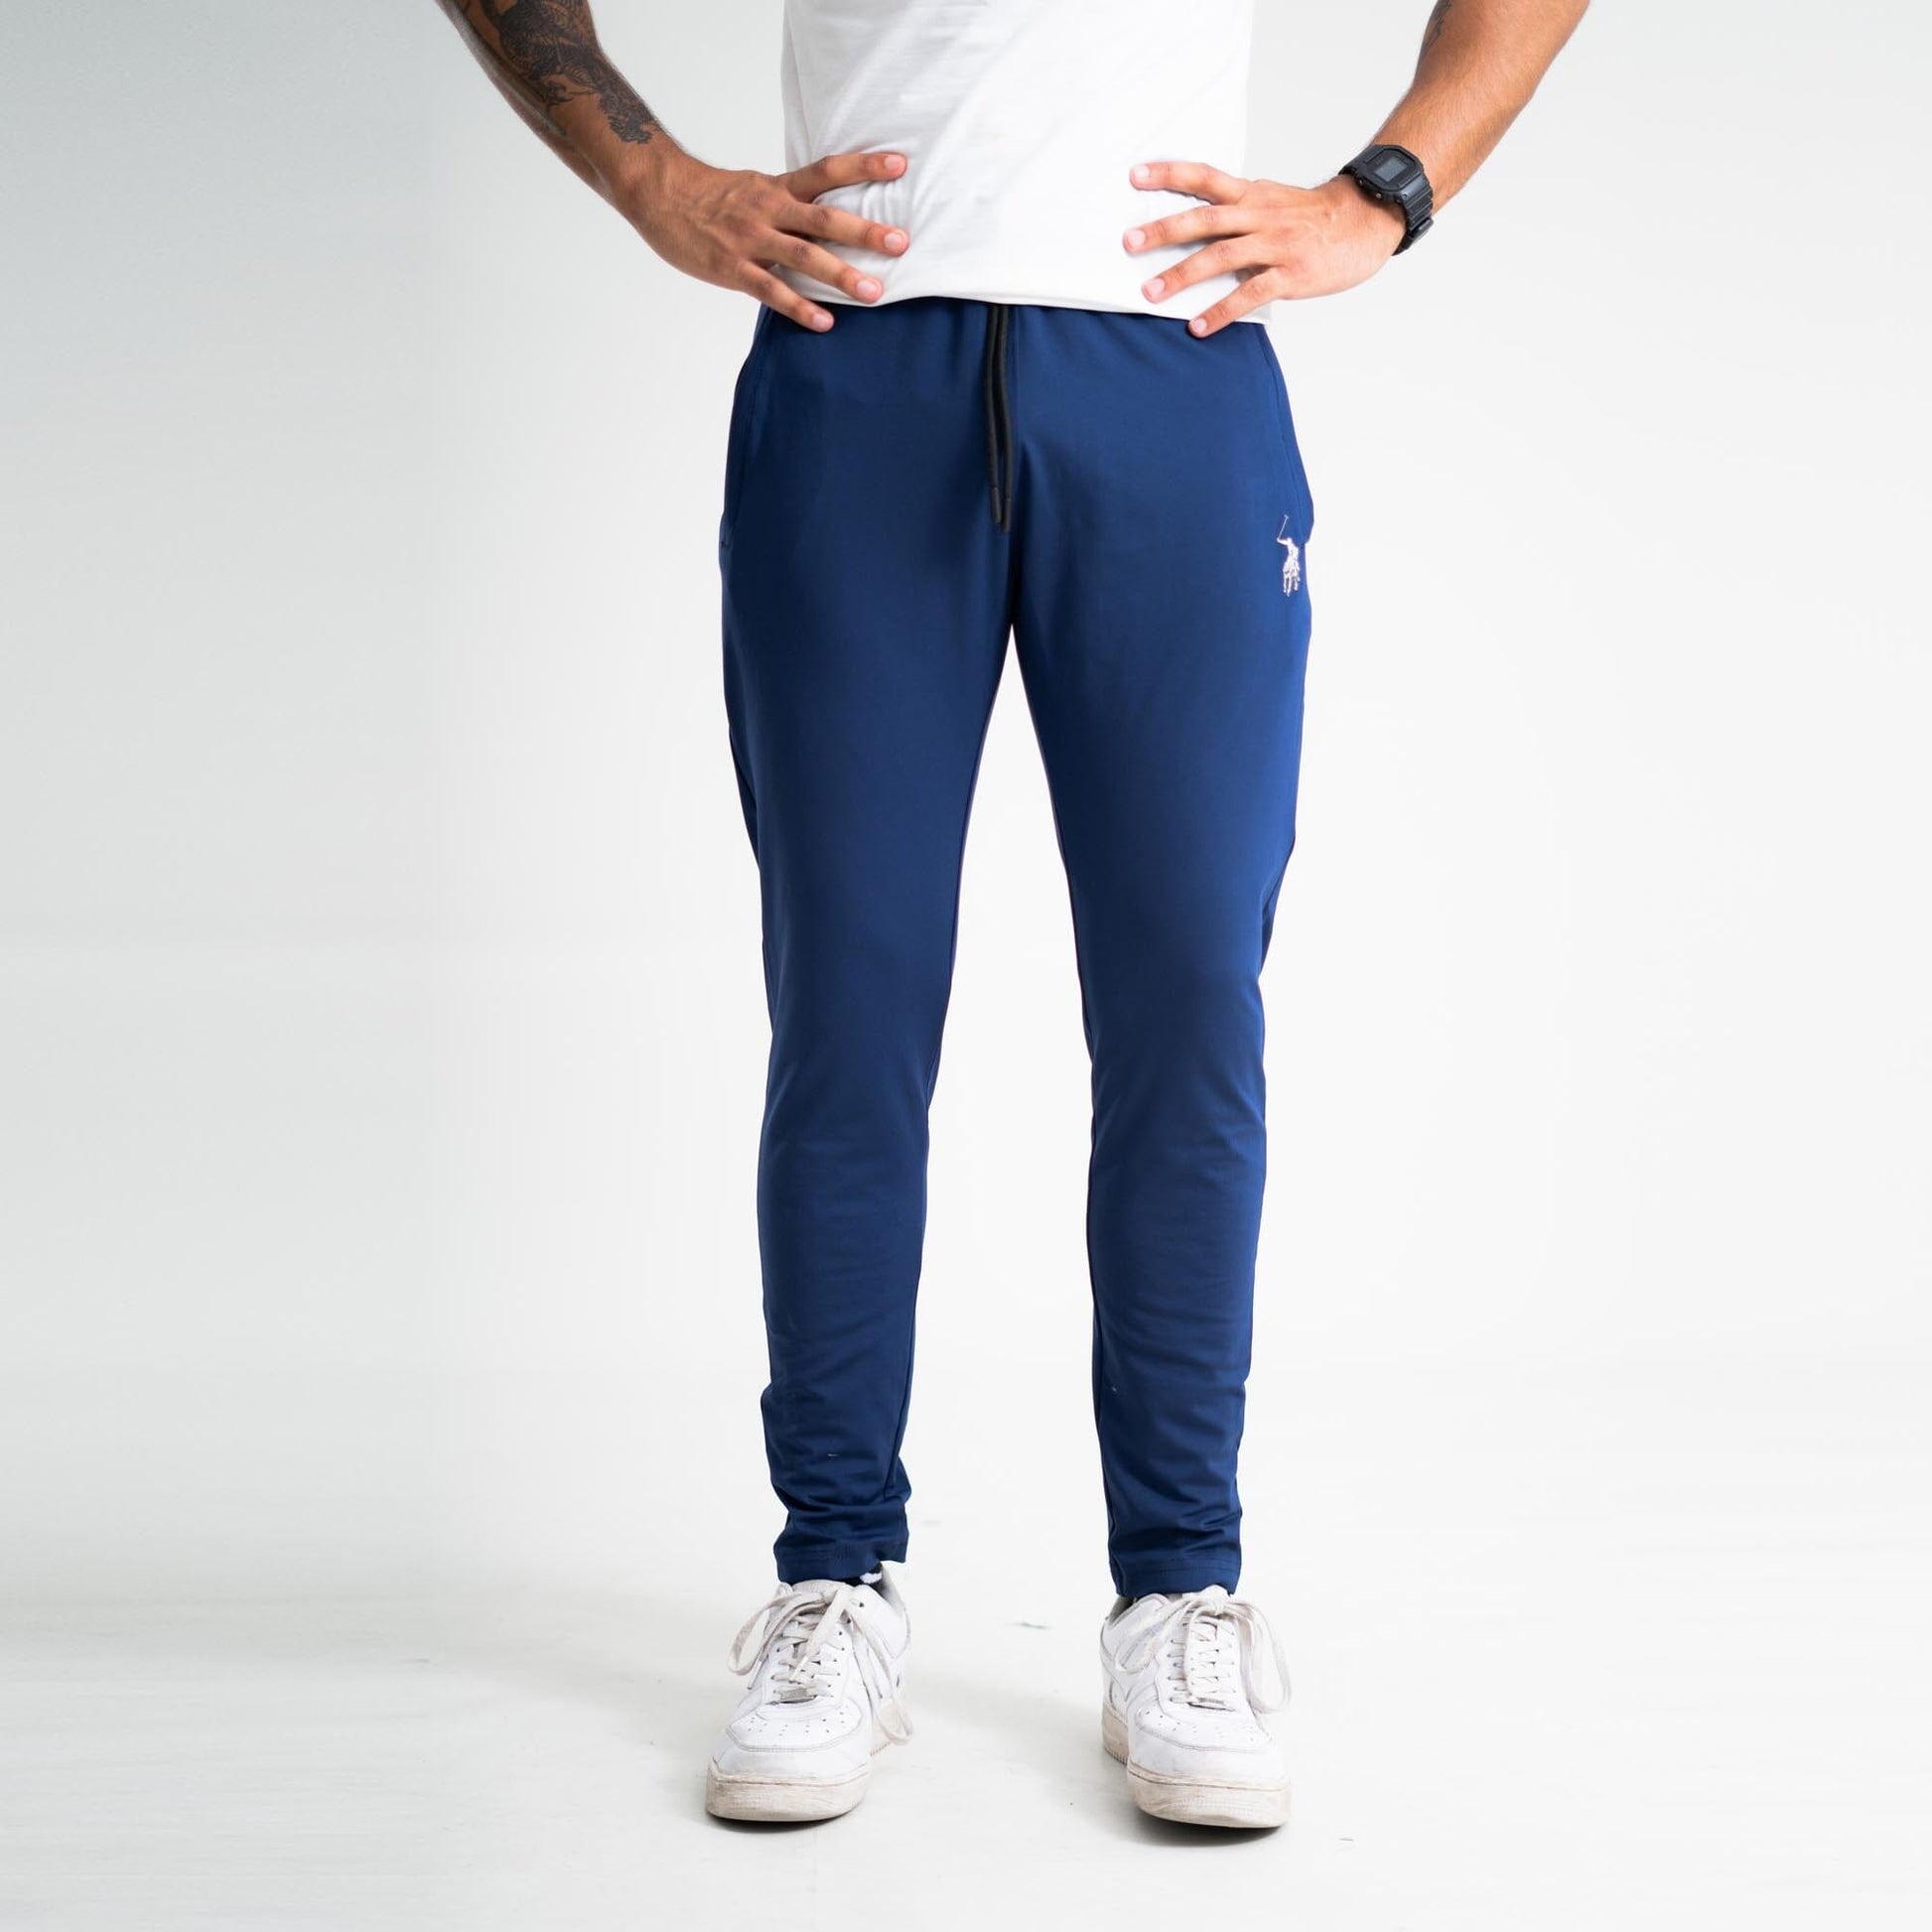 Polo Athletica Men's Slim-Fit Gym Activewear Joggers with Pony Print - Quick Dry Stretch Fabric Men's Trousers Polo Republica Navy S 